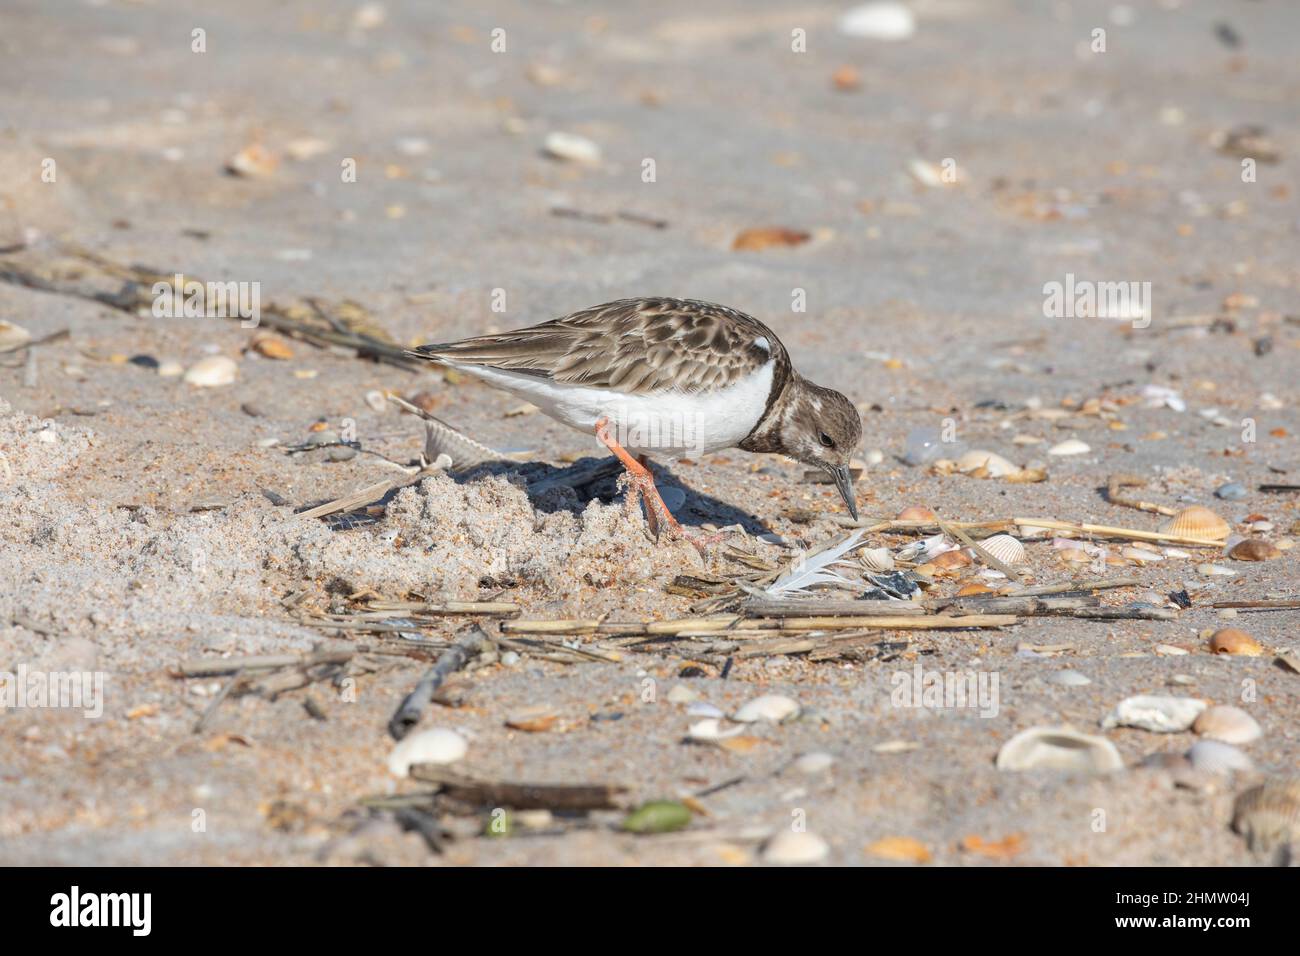 A ruddy turnstone searching for food on a beach in northeast Florida. Stock Photo